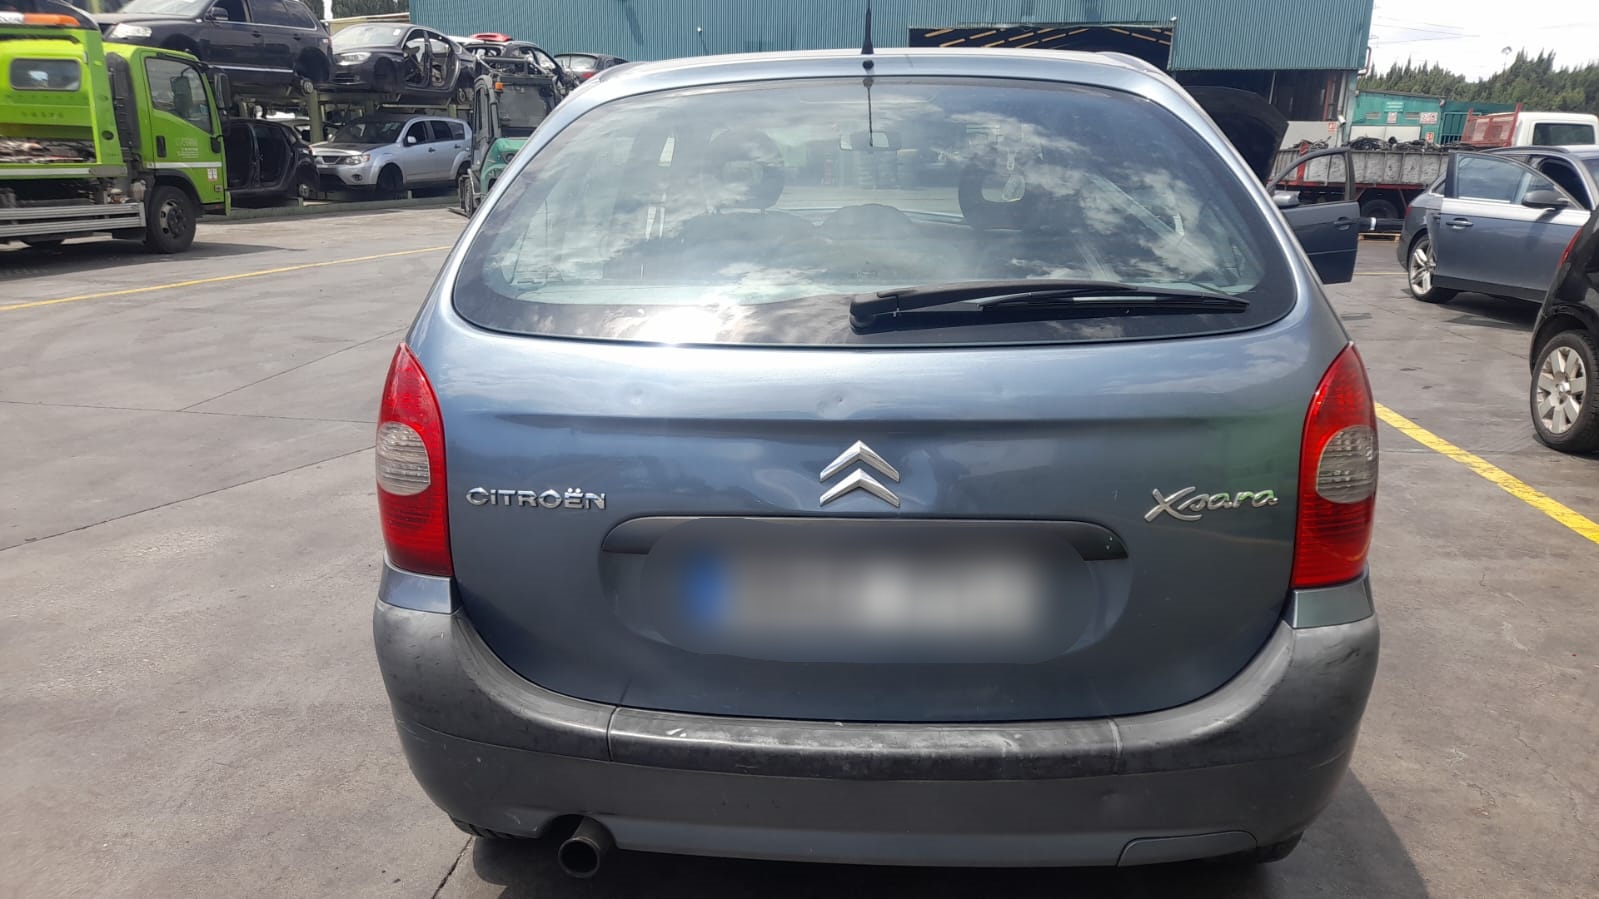 CITROËN Xsara Picasso 1 generation (1999-2010) Other Body Parts 8742G3 25391424